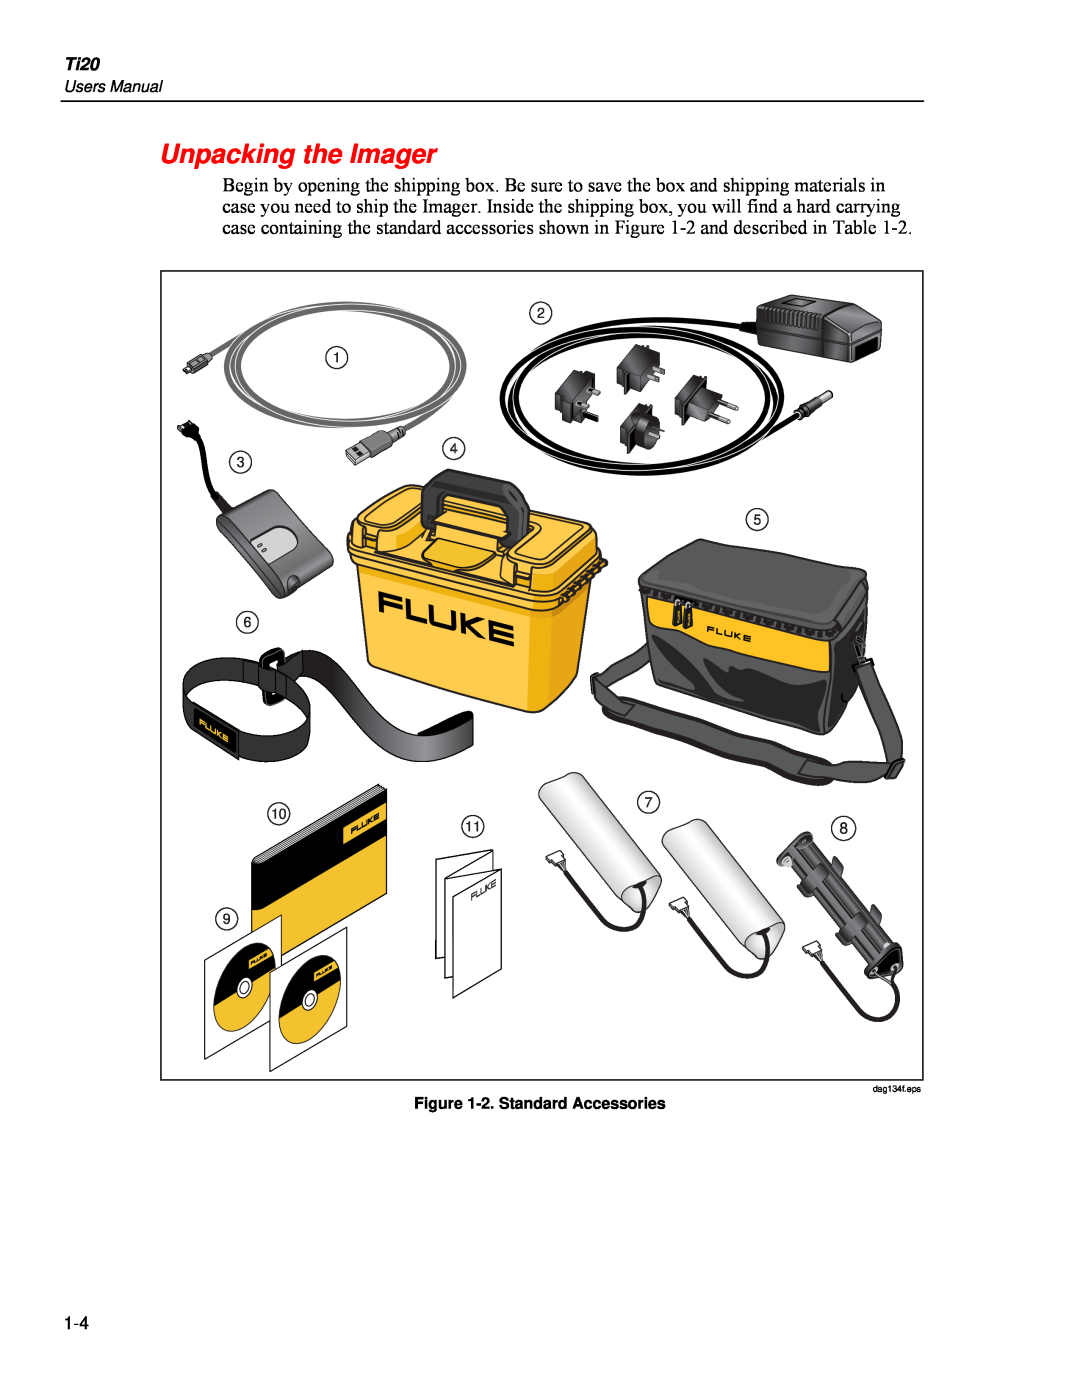 Fluke Ti20 user manual Unpacking the Imager, 2.Standard Accessories 